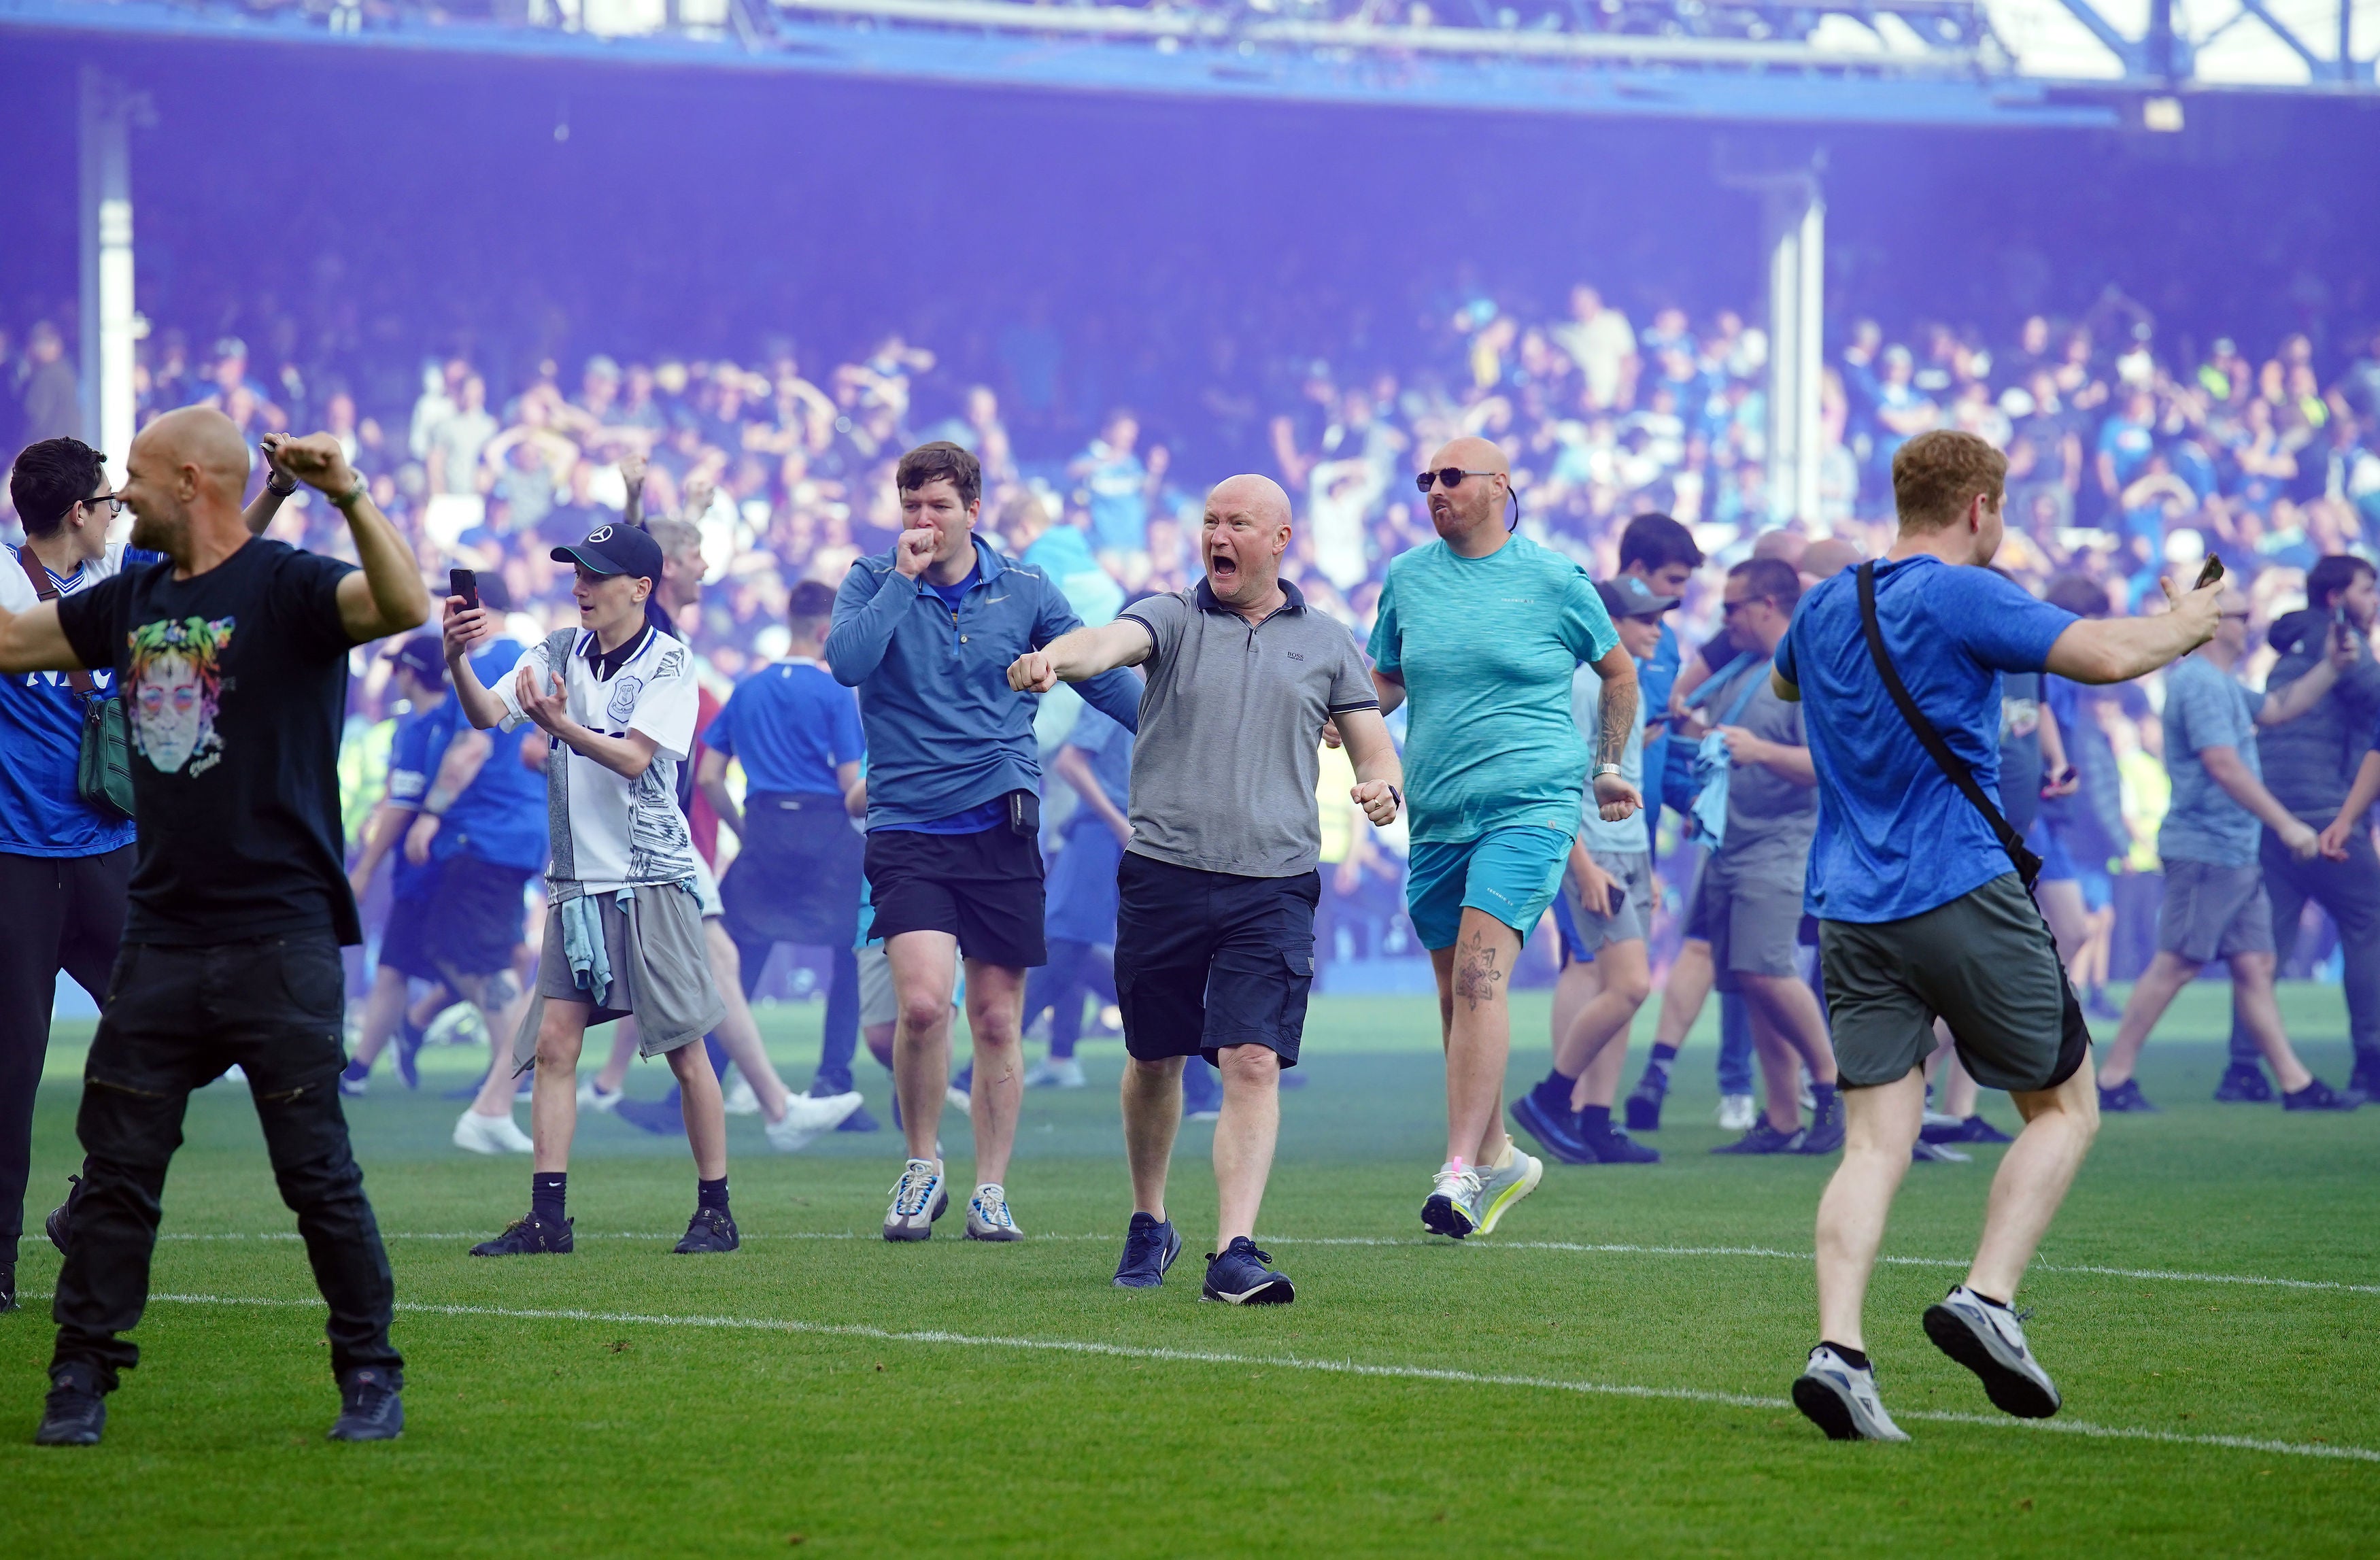 Jubilant Everton invade the pitch after the final whistle